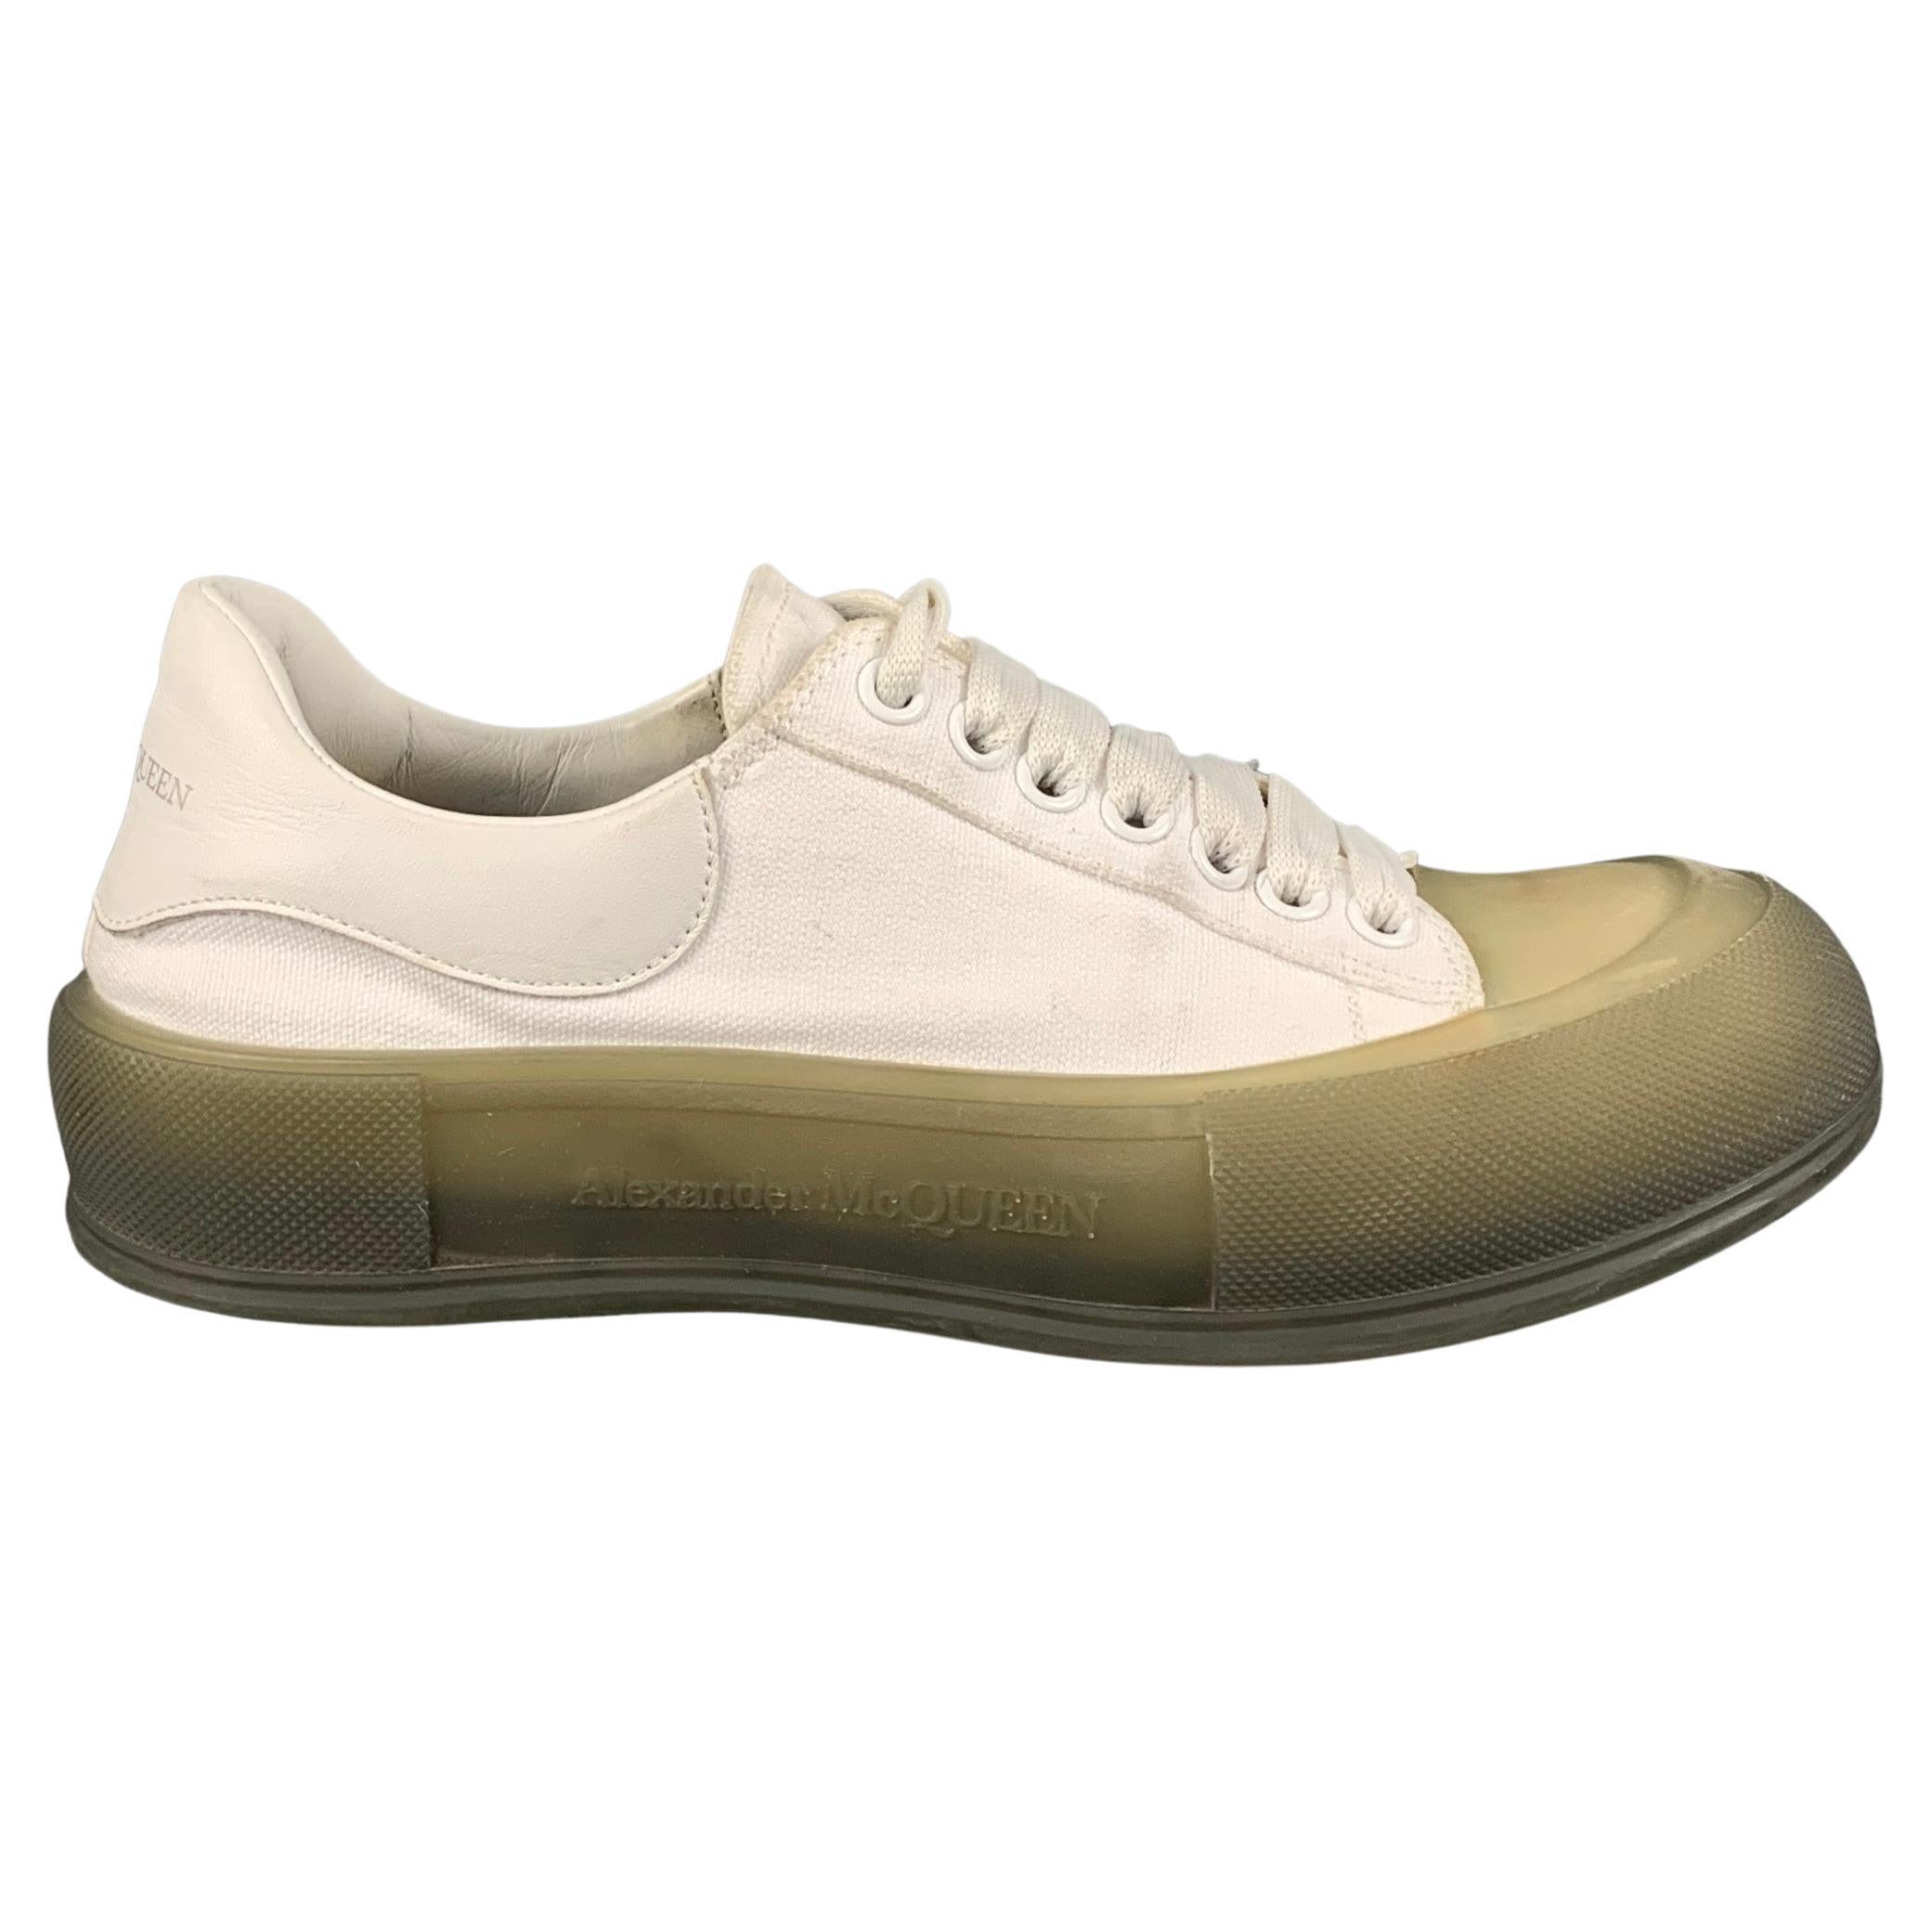 ALEXANDER MCQUEEN Size 8 White Olive Canvas Low Top Plimsoll Sneakers